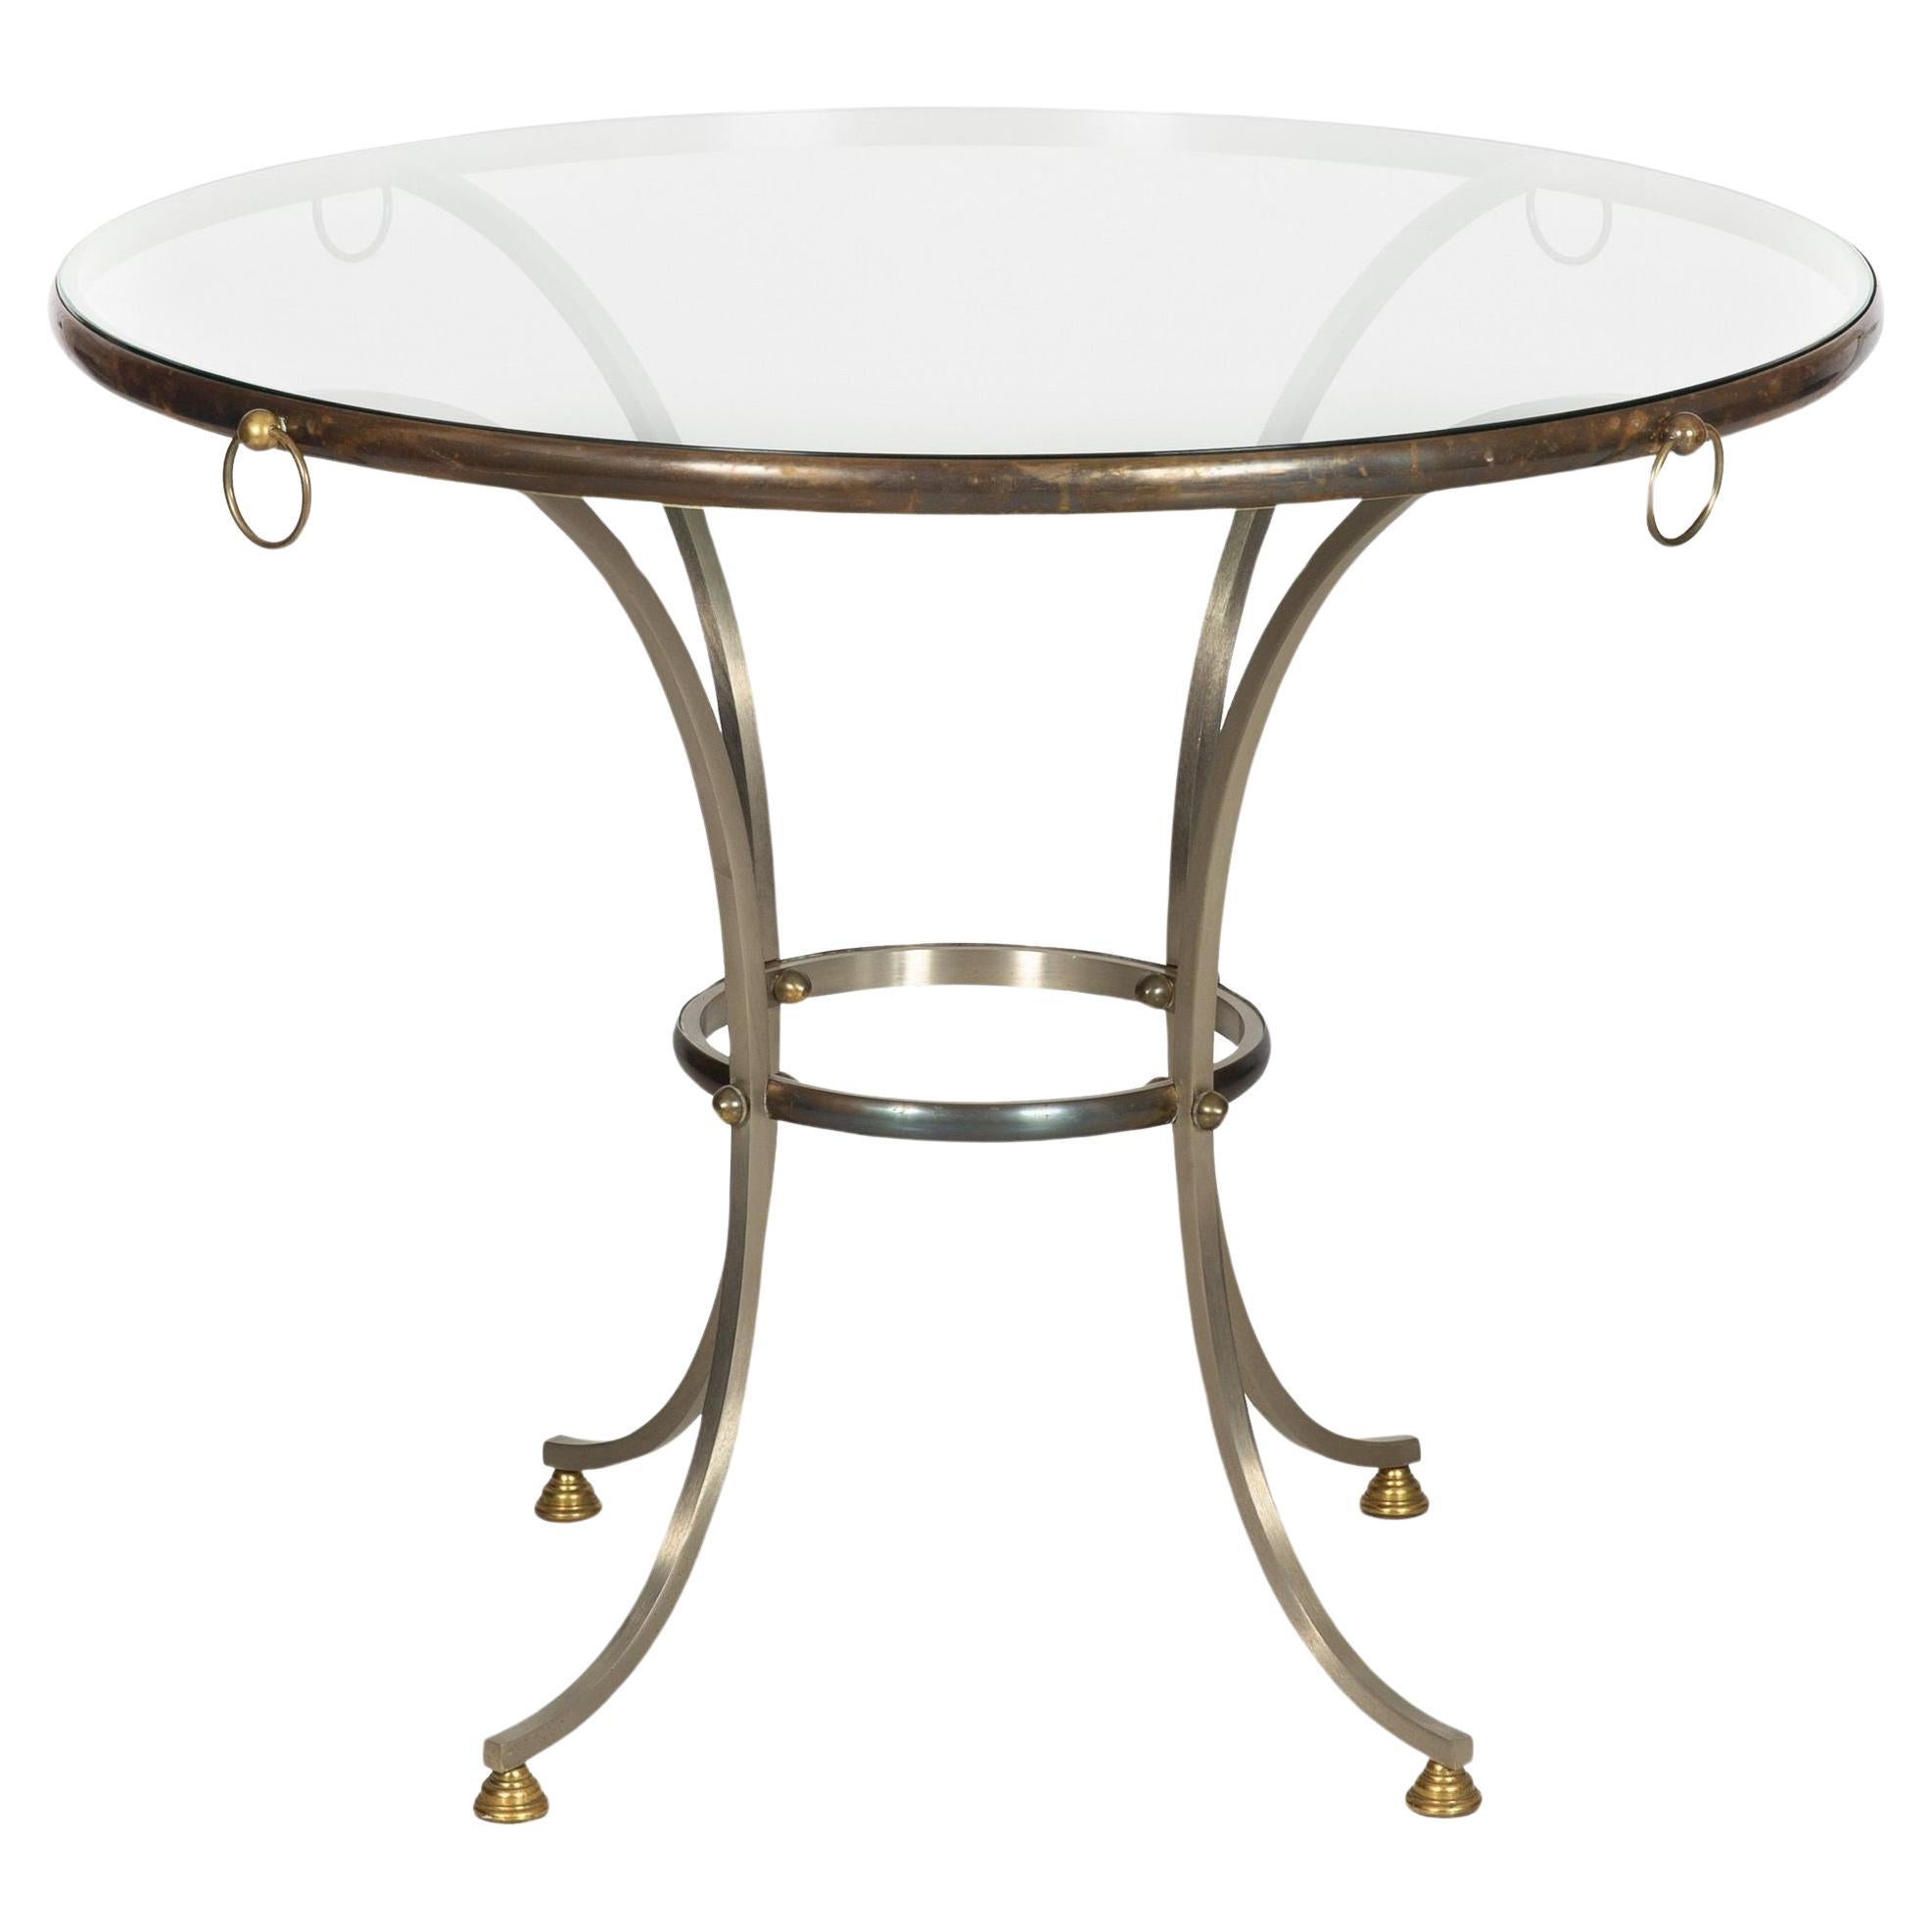 Hollywood Regency Round Circular Table, manner of Maison Jansen ca. 1970s For Sale